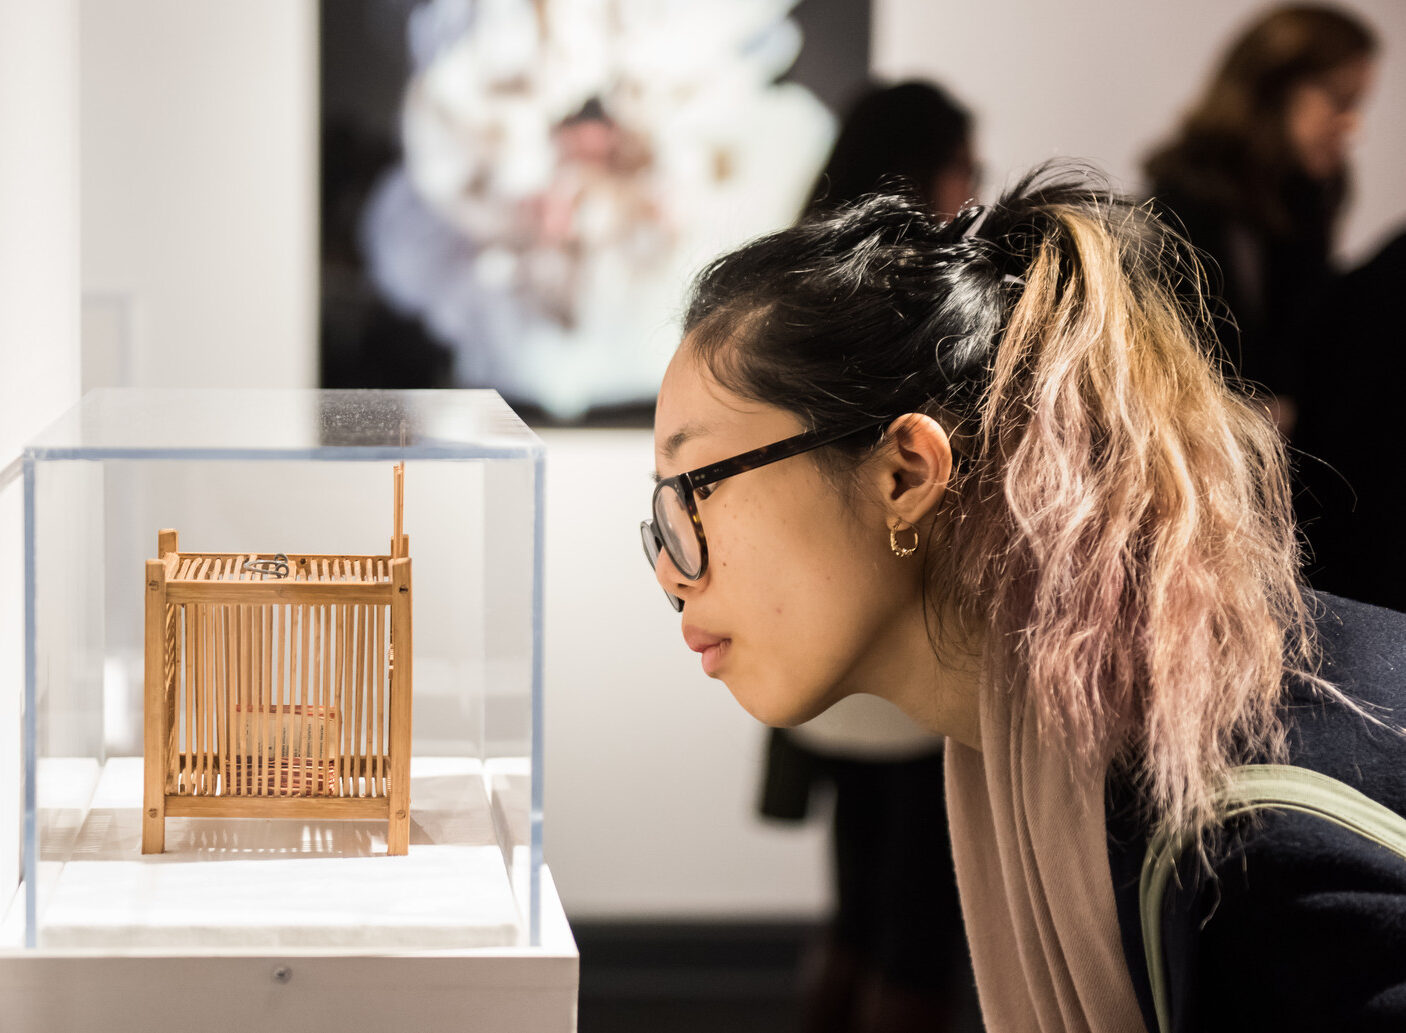 Partial gallery view of a young woman in a ponytail and glasses bending down to look at a tiny contemporary sculpture in a glass vitrine. The sculpture is a wooden cage with an object stored inside. On the back wall hangs a photograph of a light-skinned woman in a white dress.